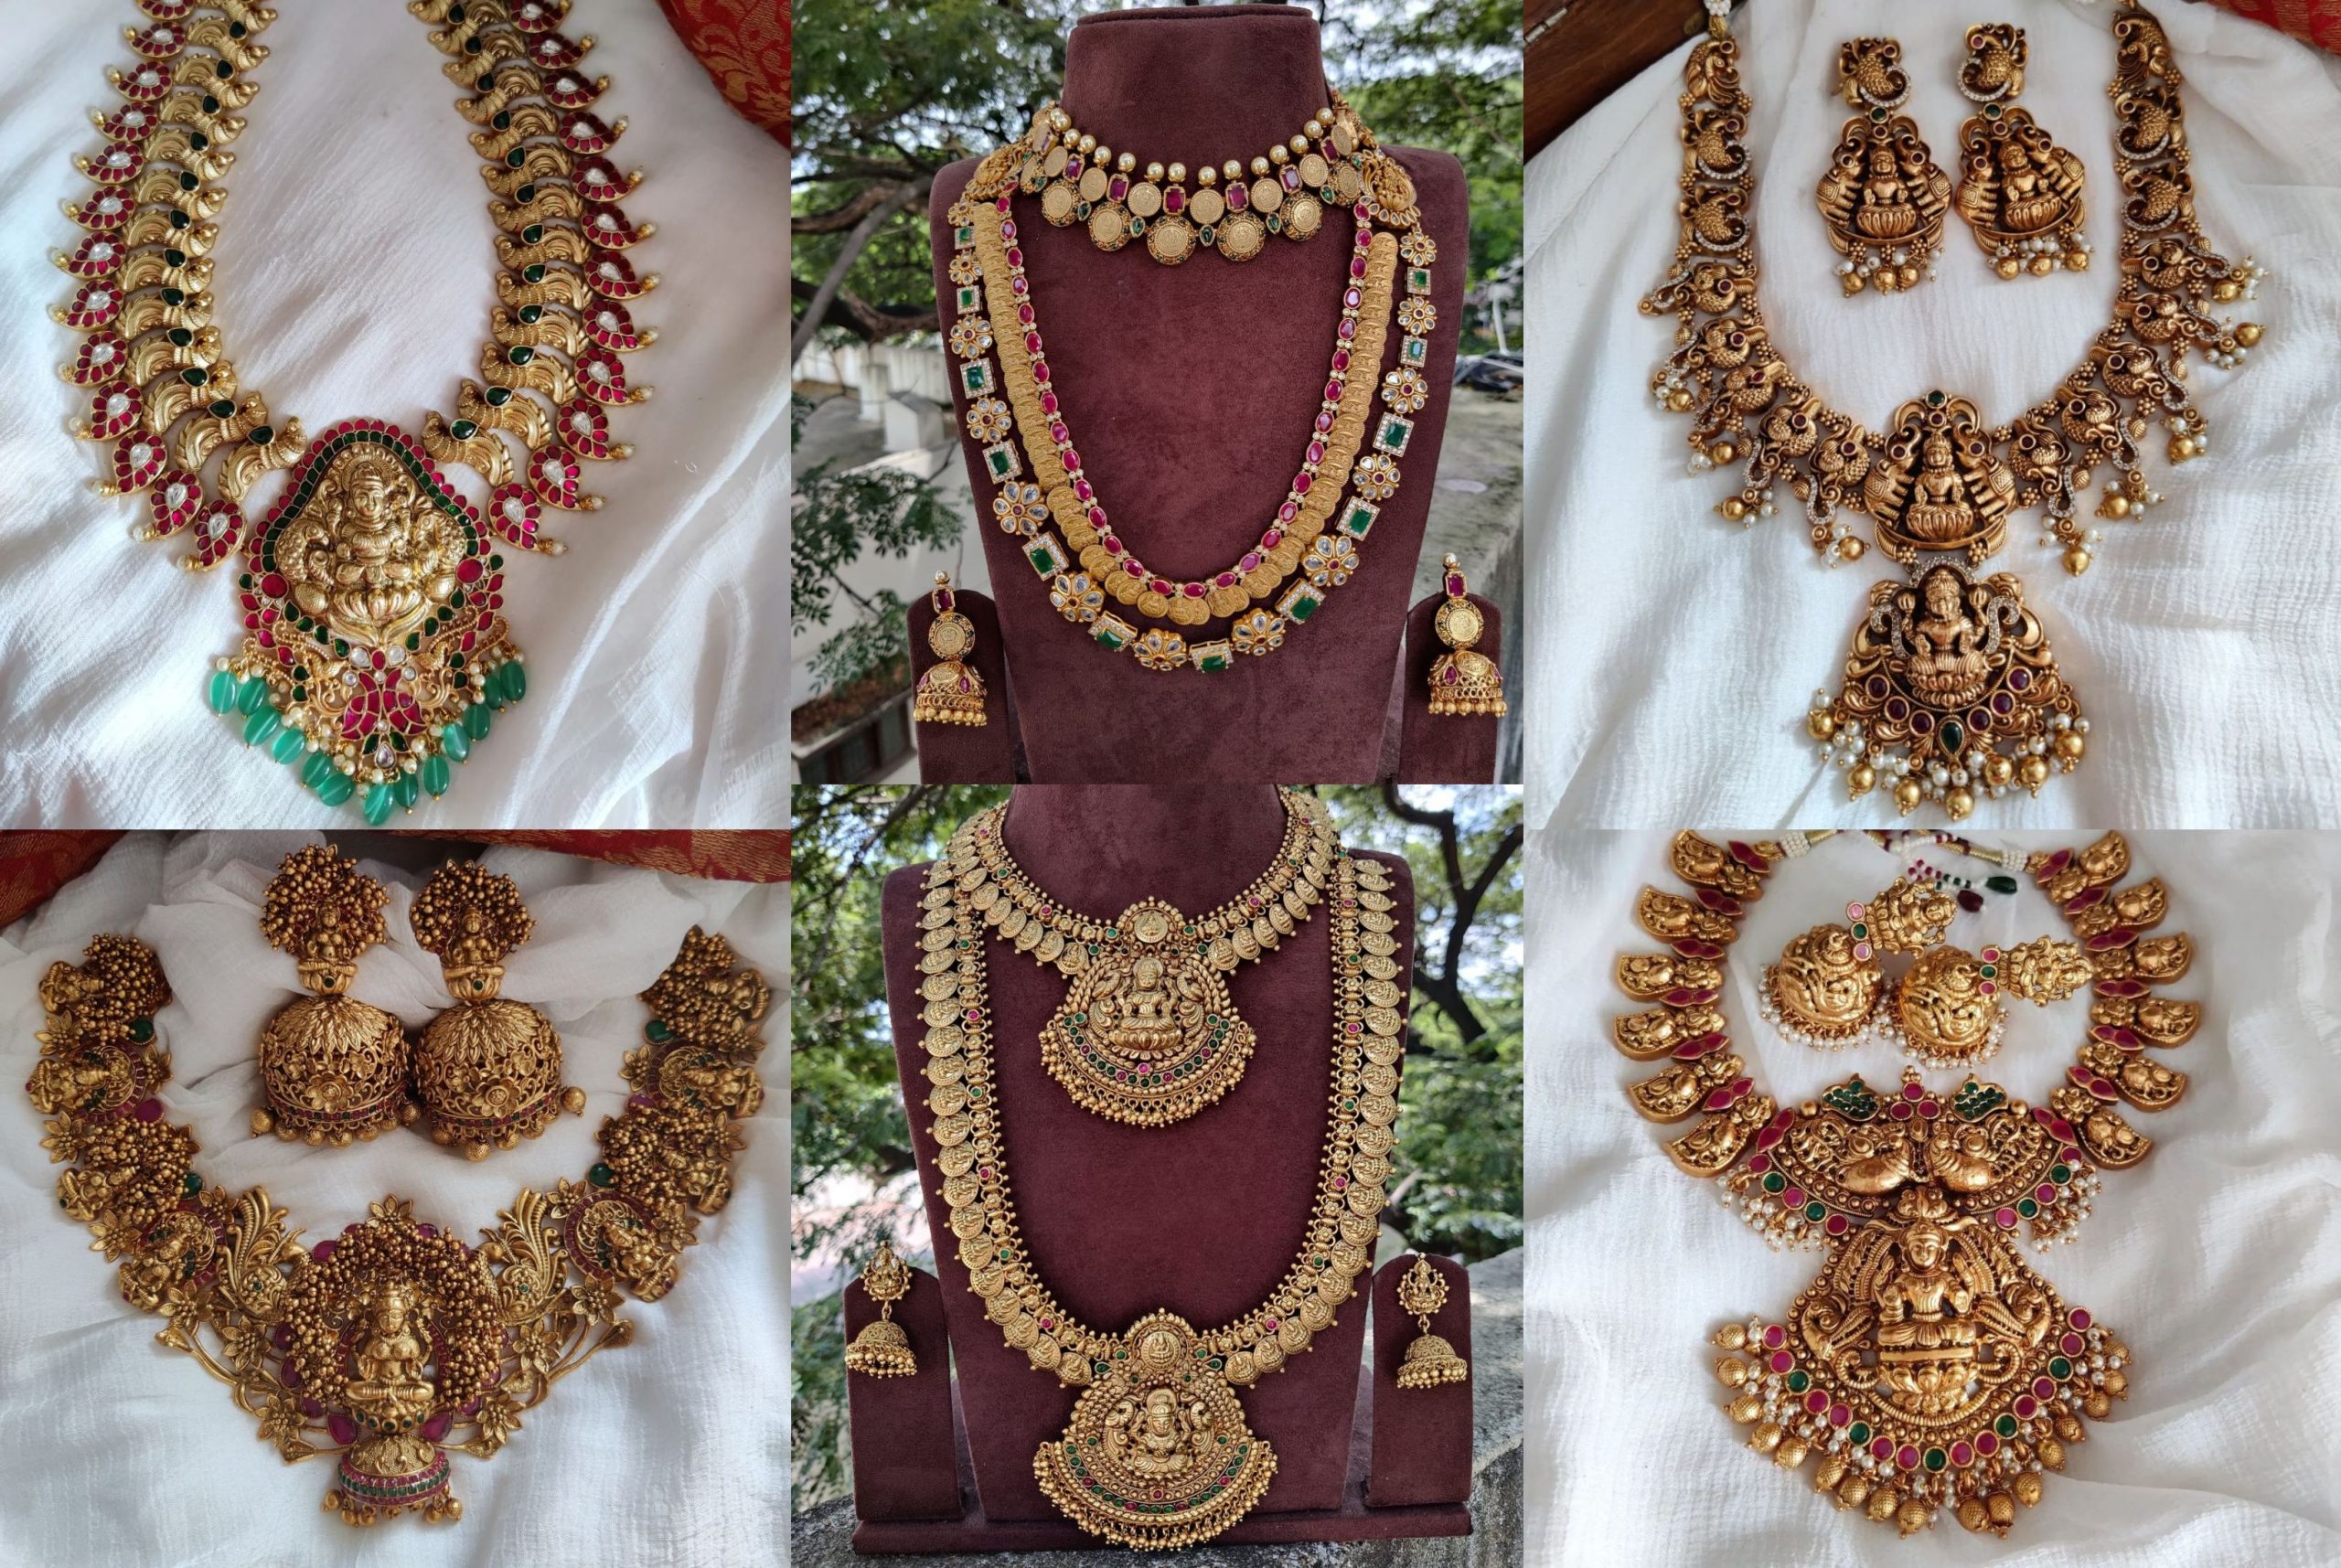 Temple Antique Design Collection From Posh Jewellery!